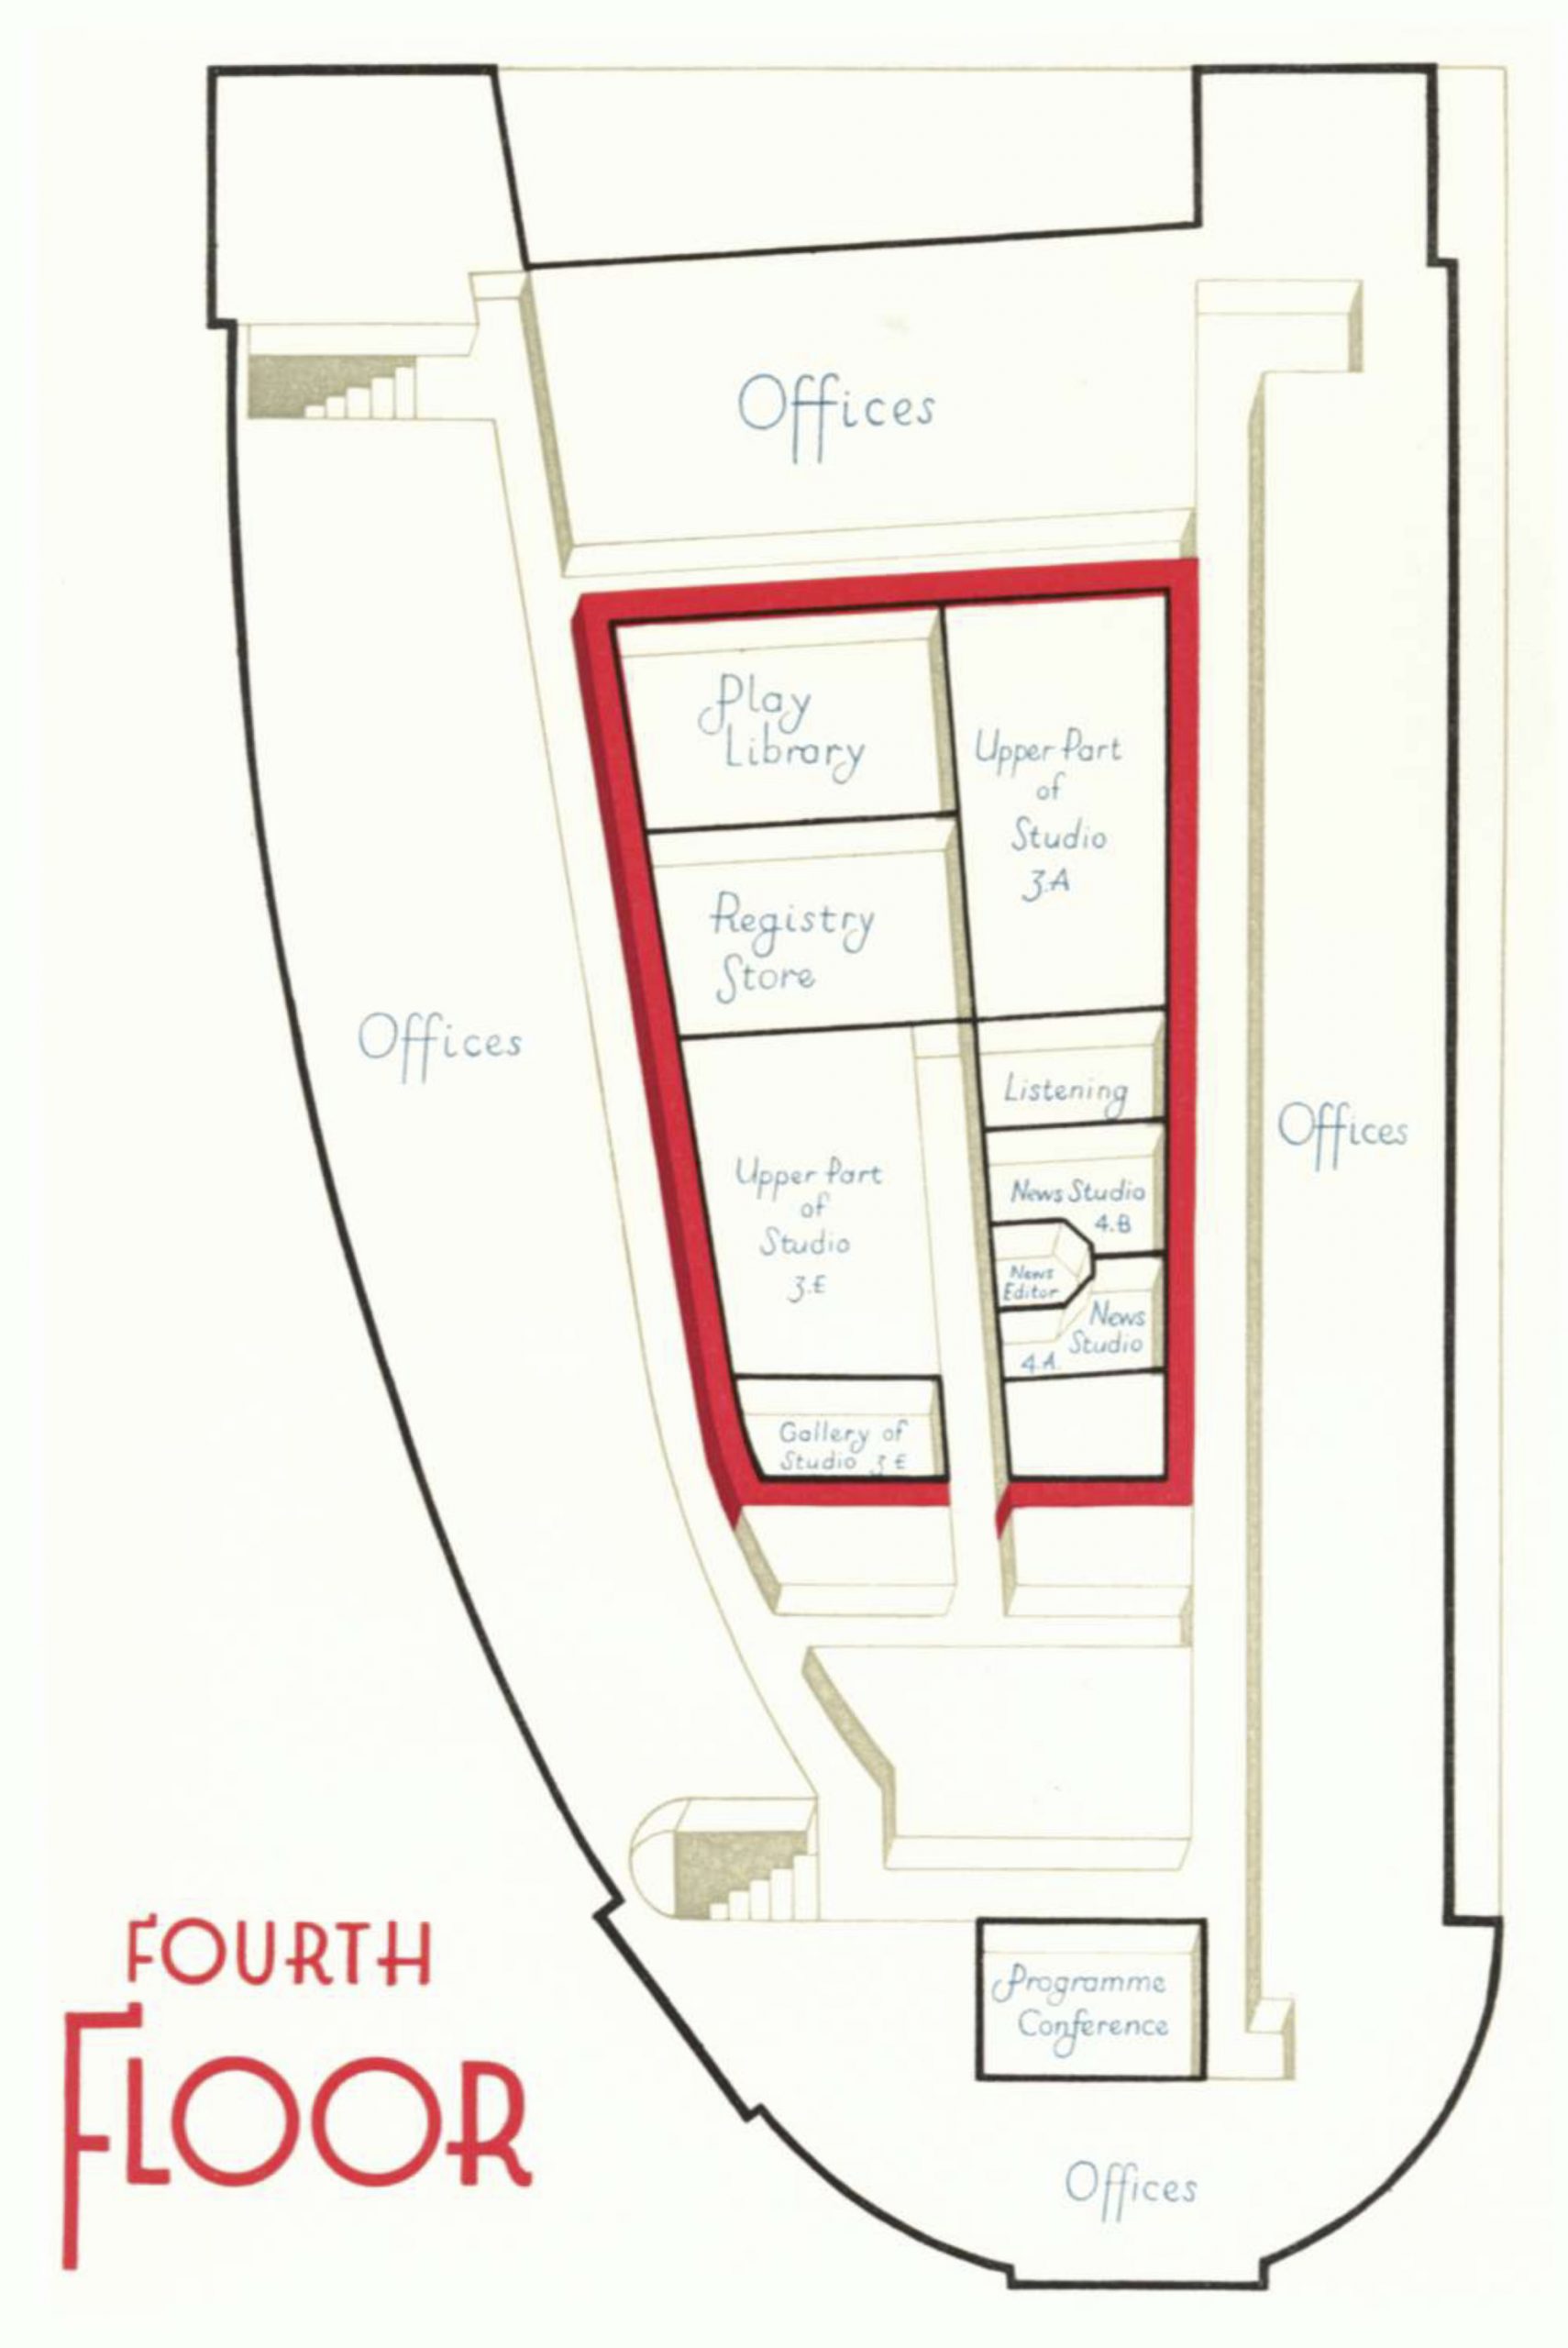 Diagram of the forth floor